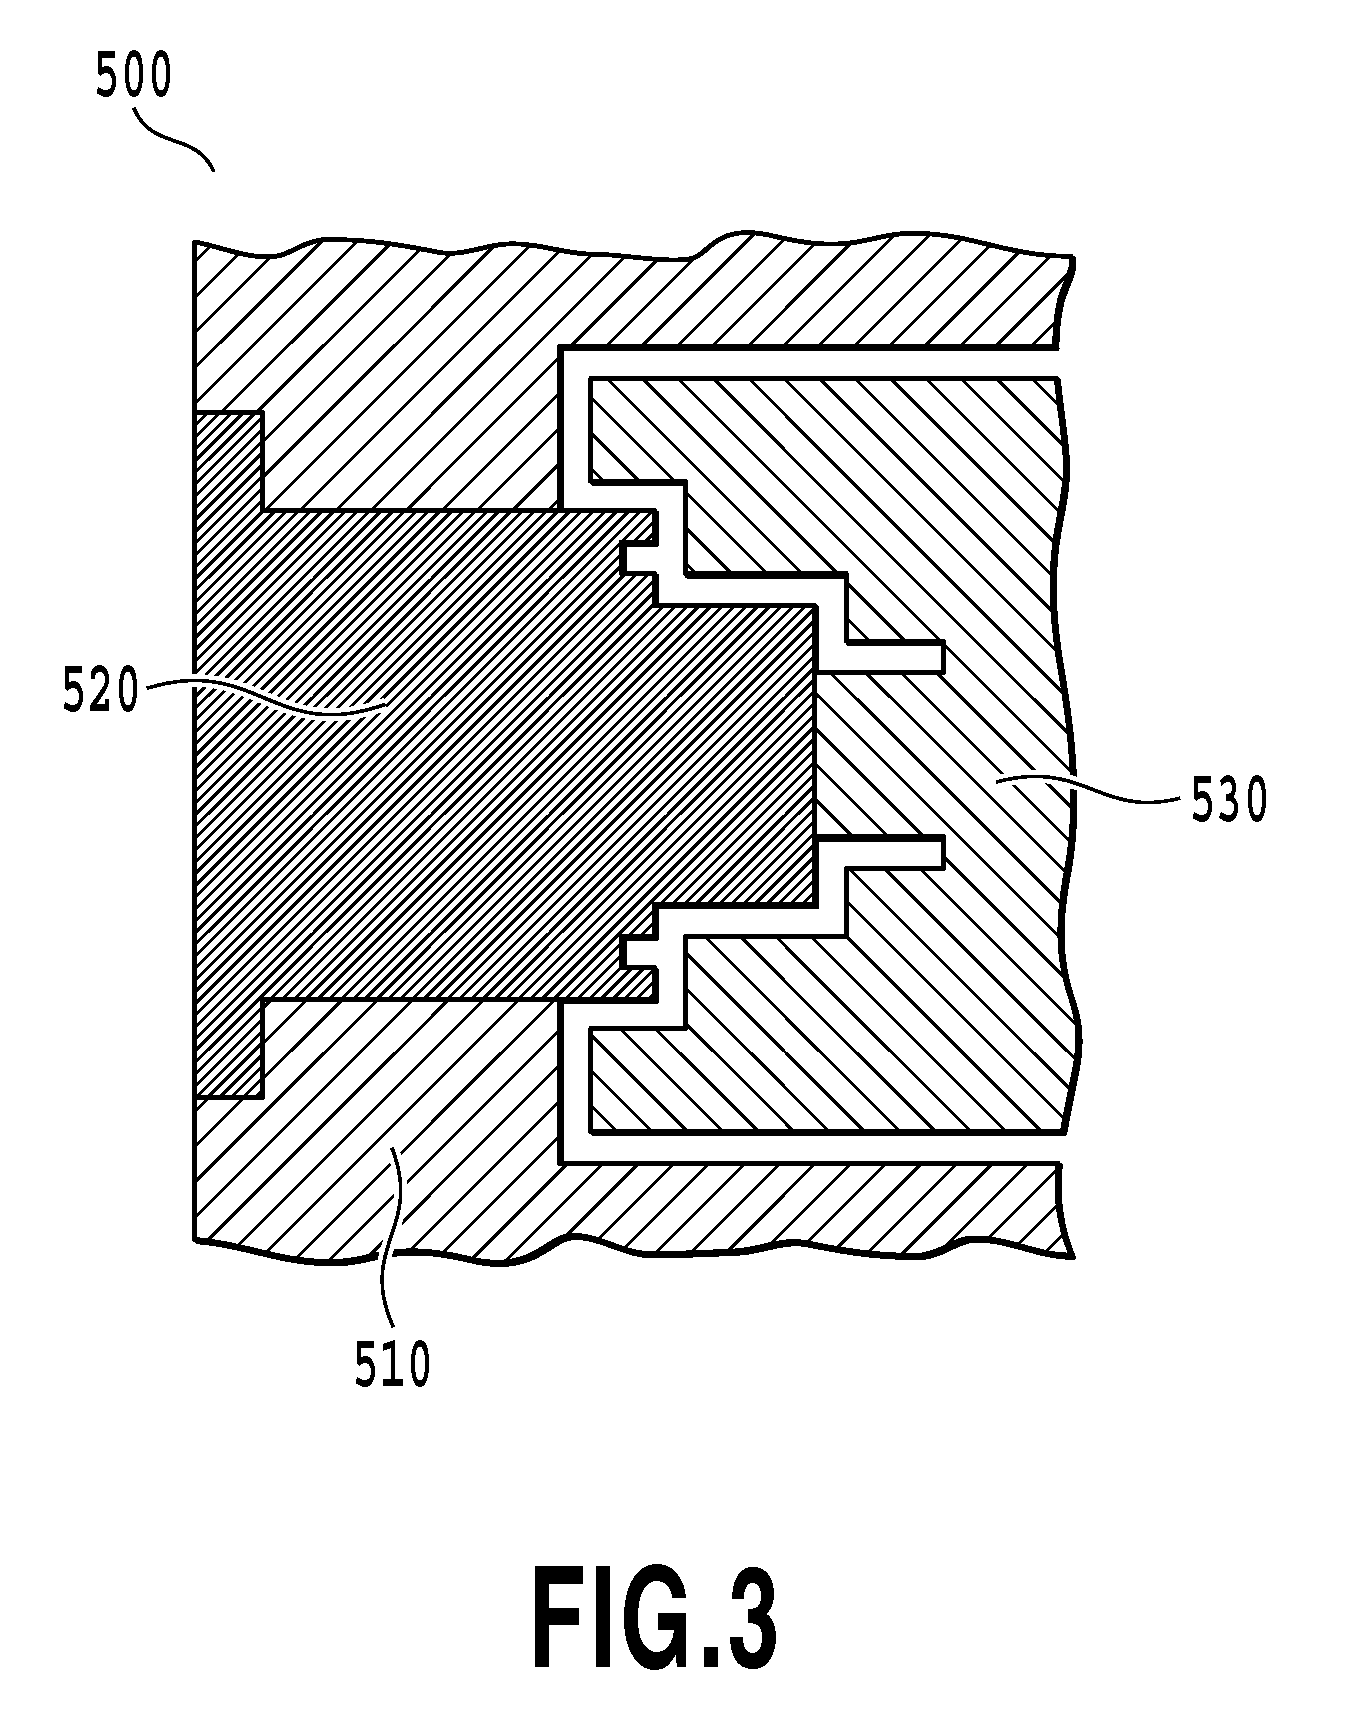 Method of manufacturing an ink jet print head